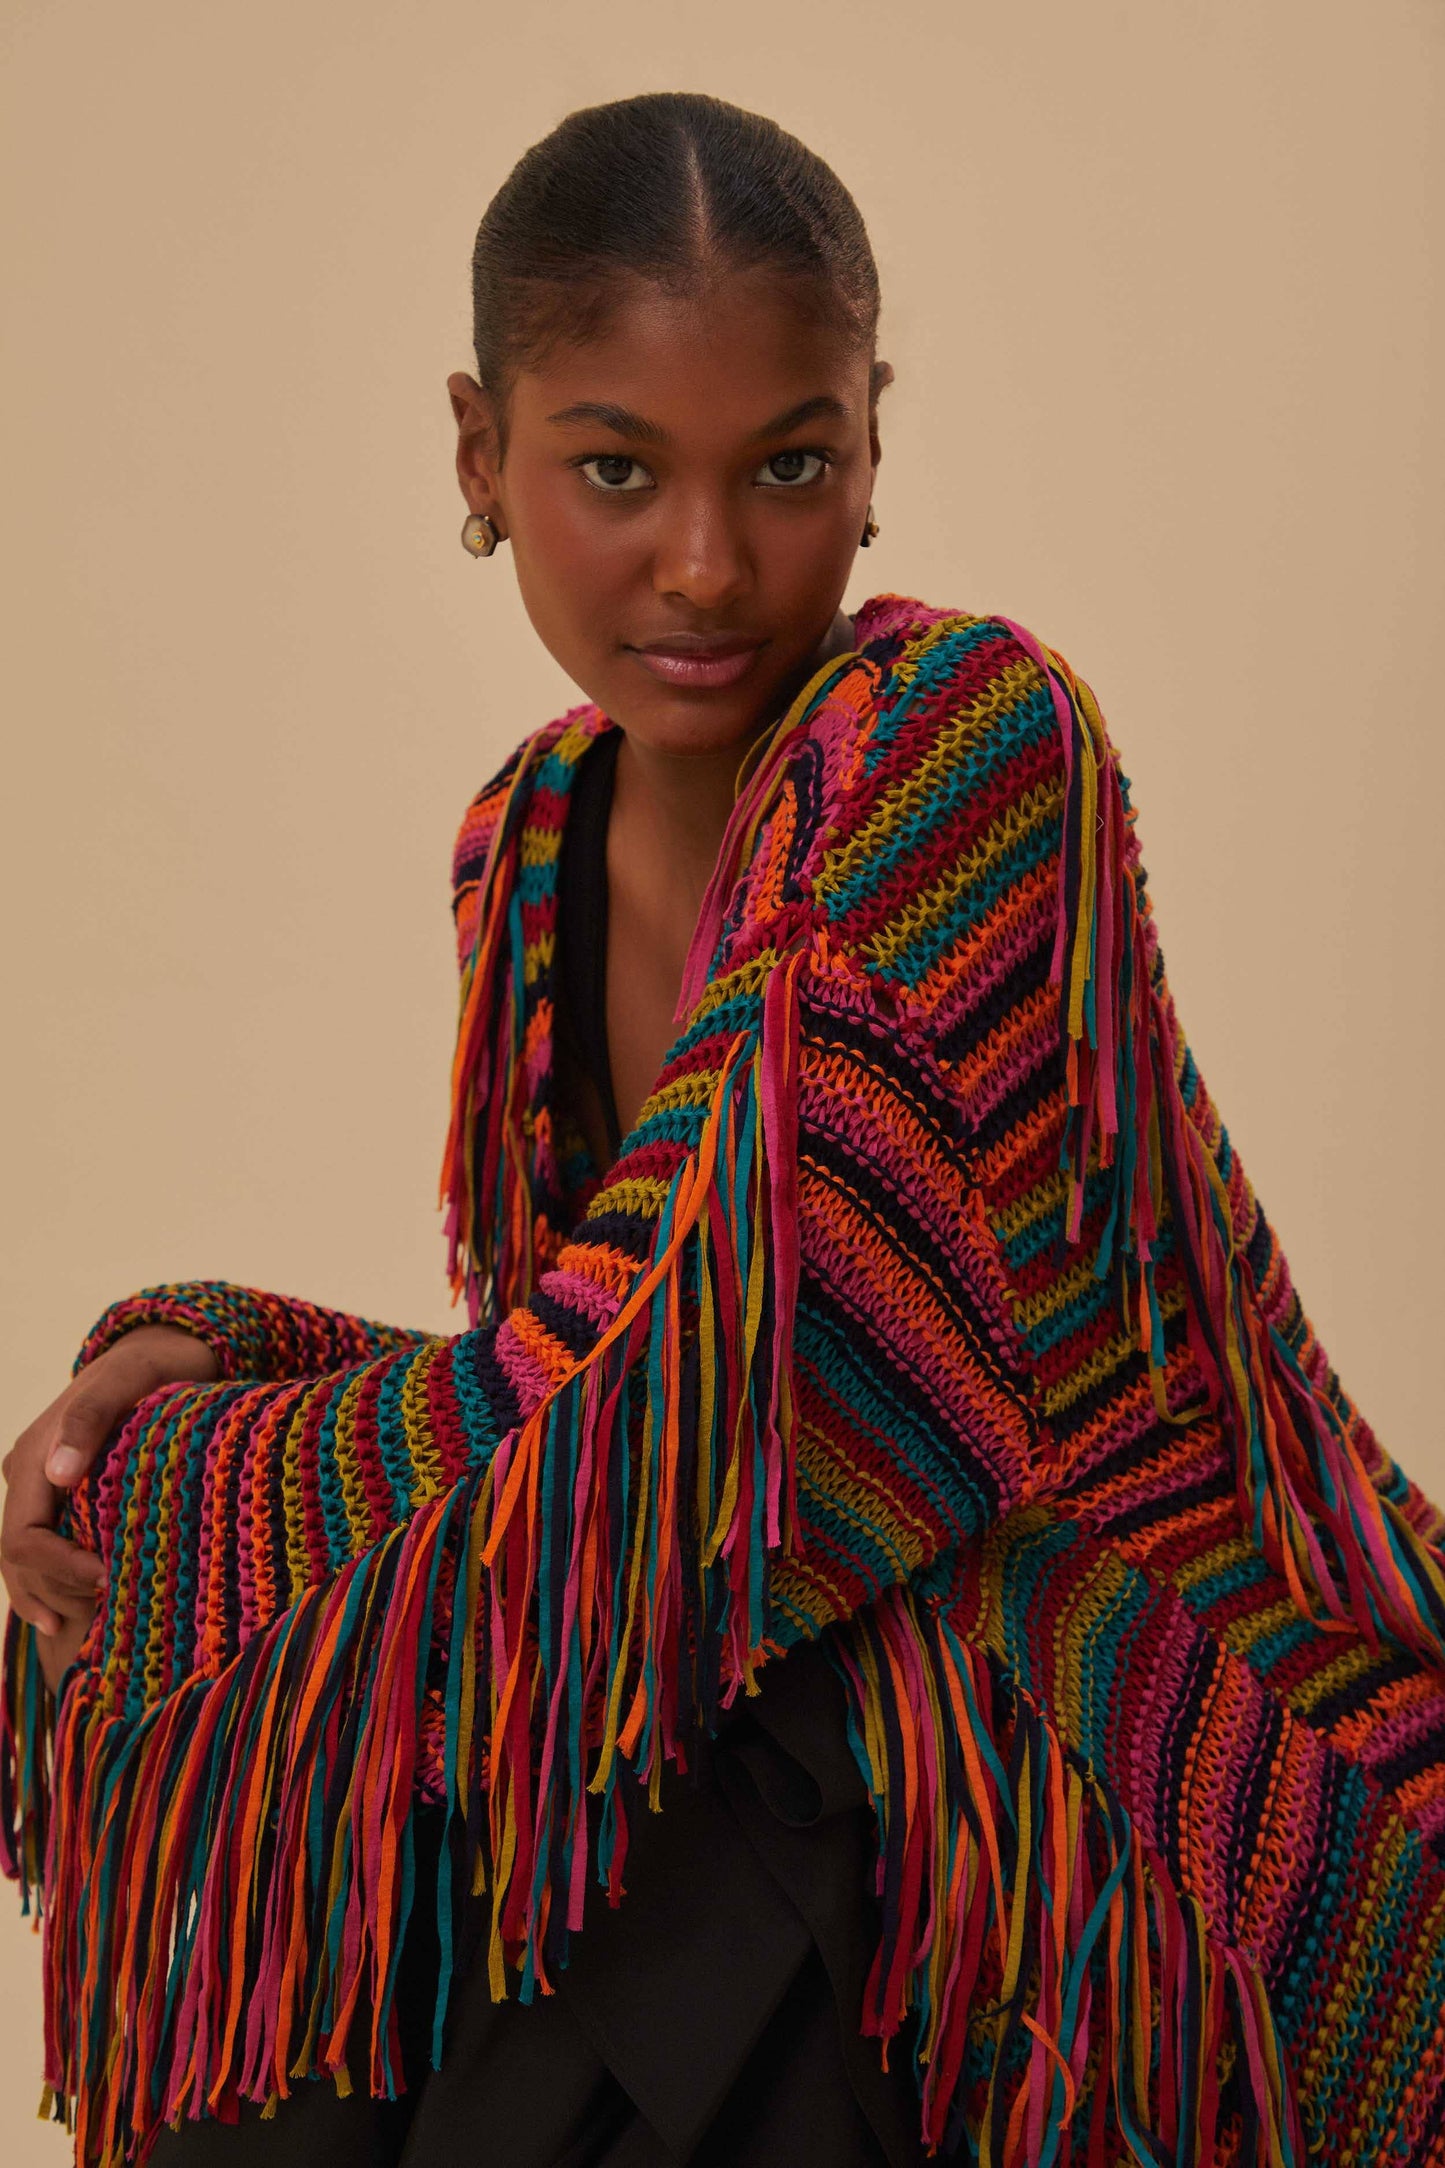 Colorful Stripes Knit Cardigan